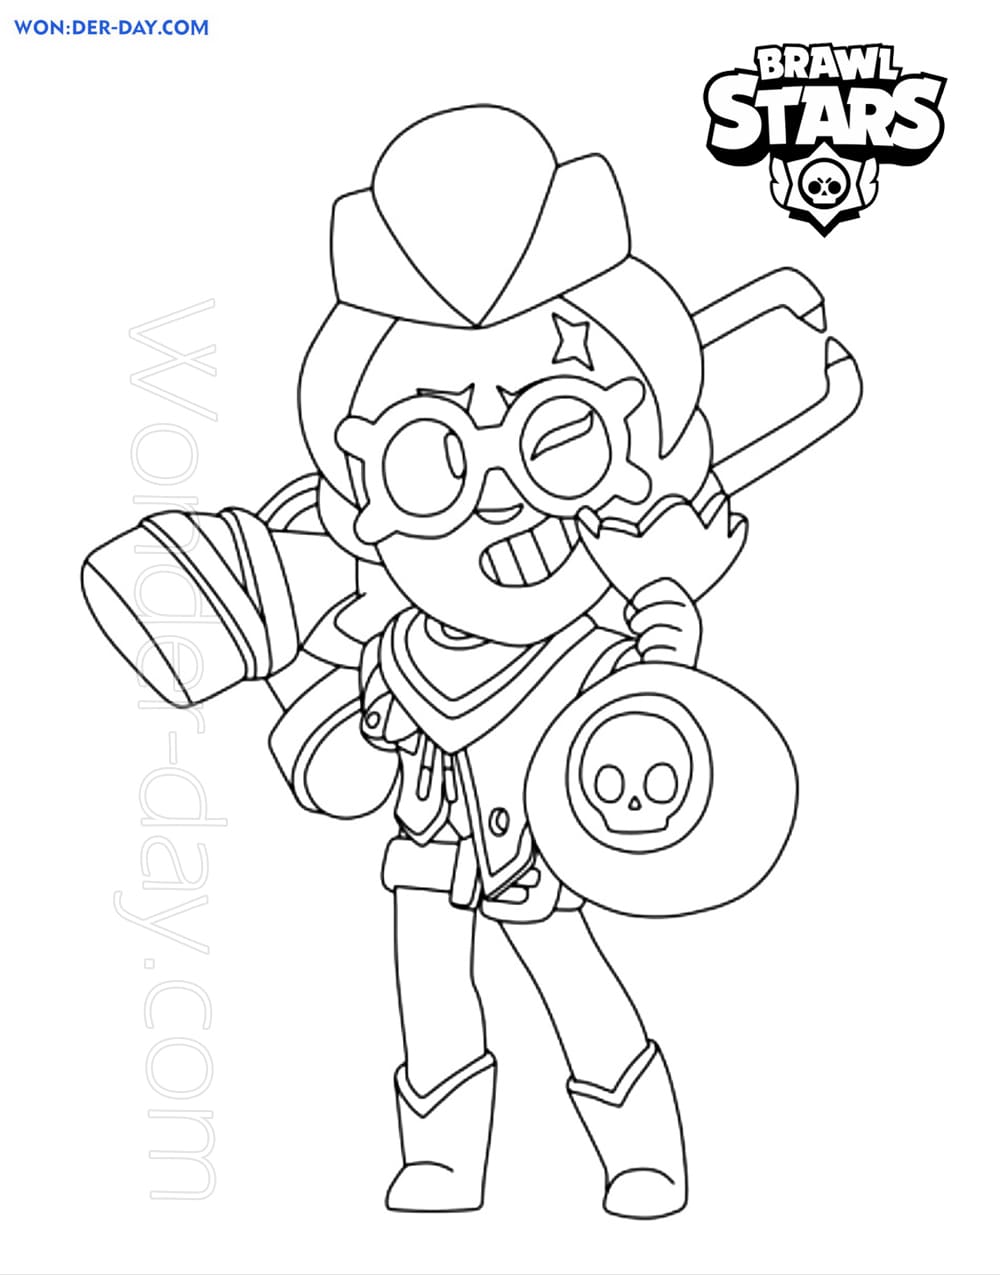 Belle Brawl Stars Coloring Pages Wonder Day Coloring Pages For Children And Adults - brawl stars para pintar